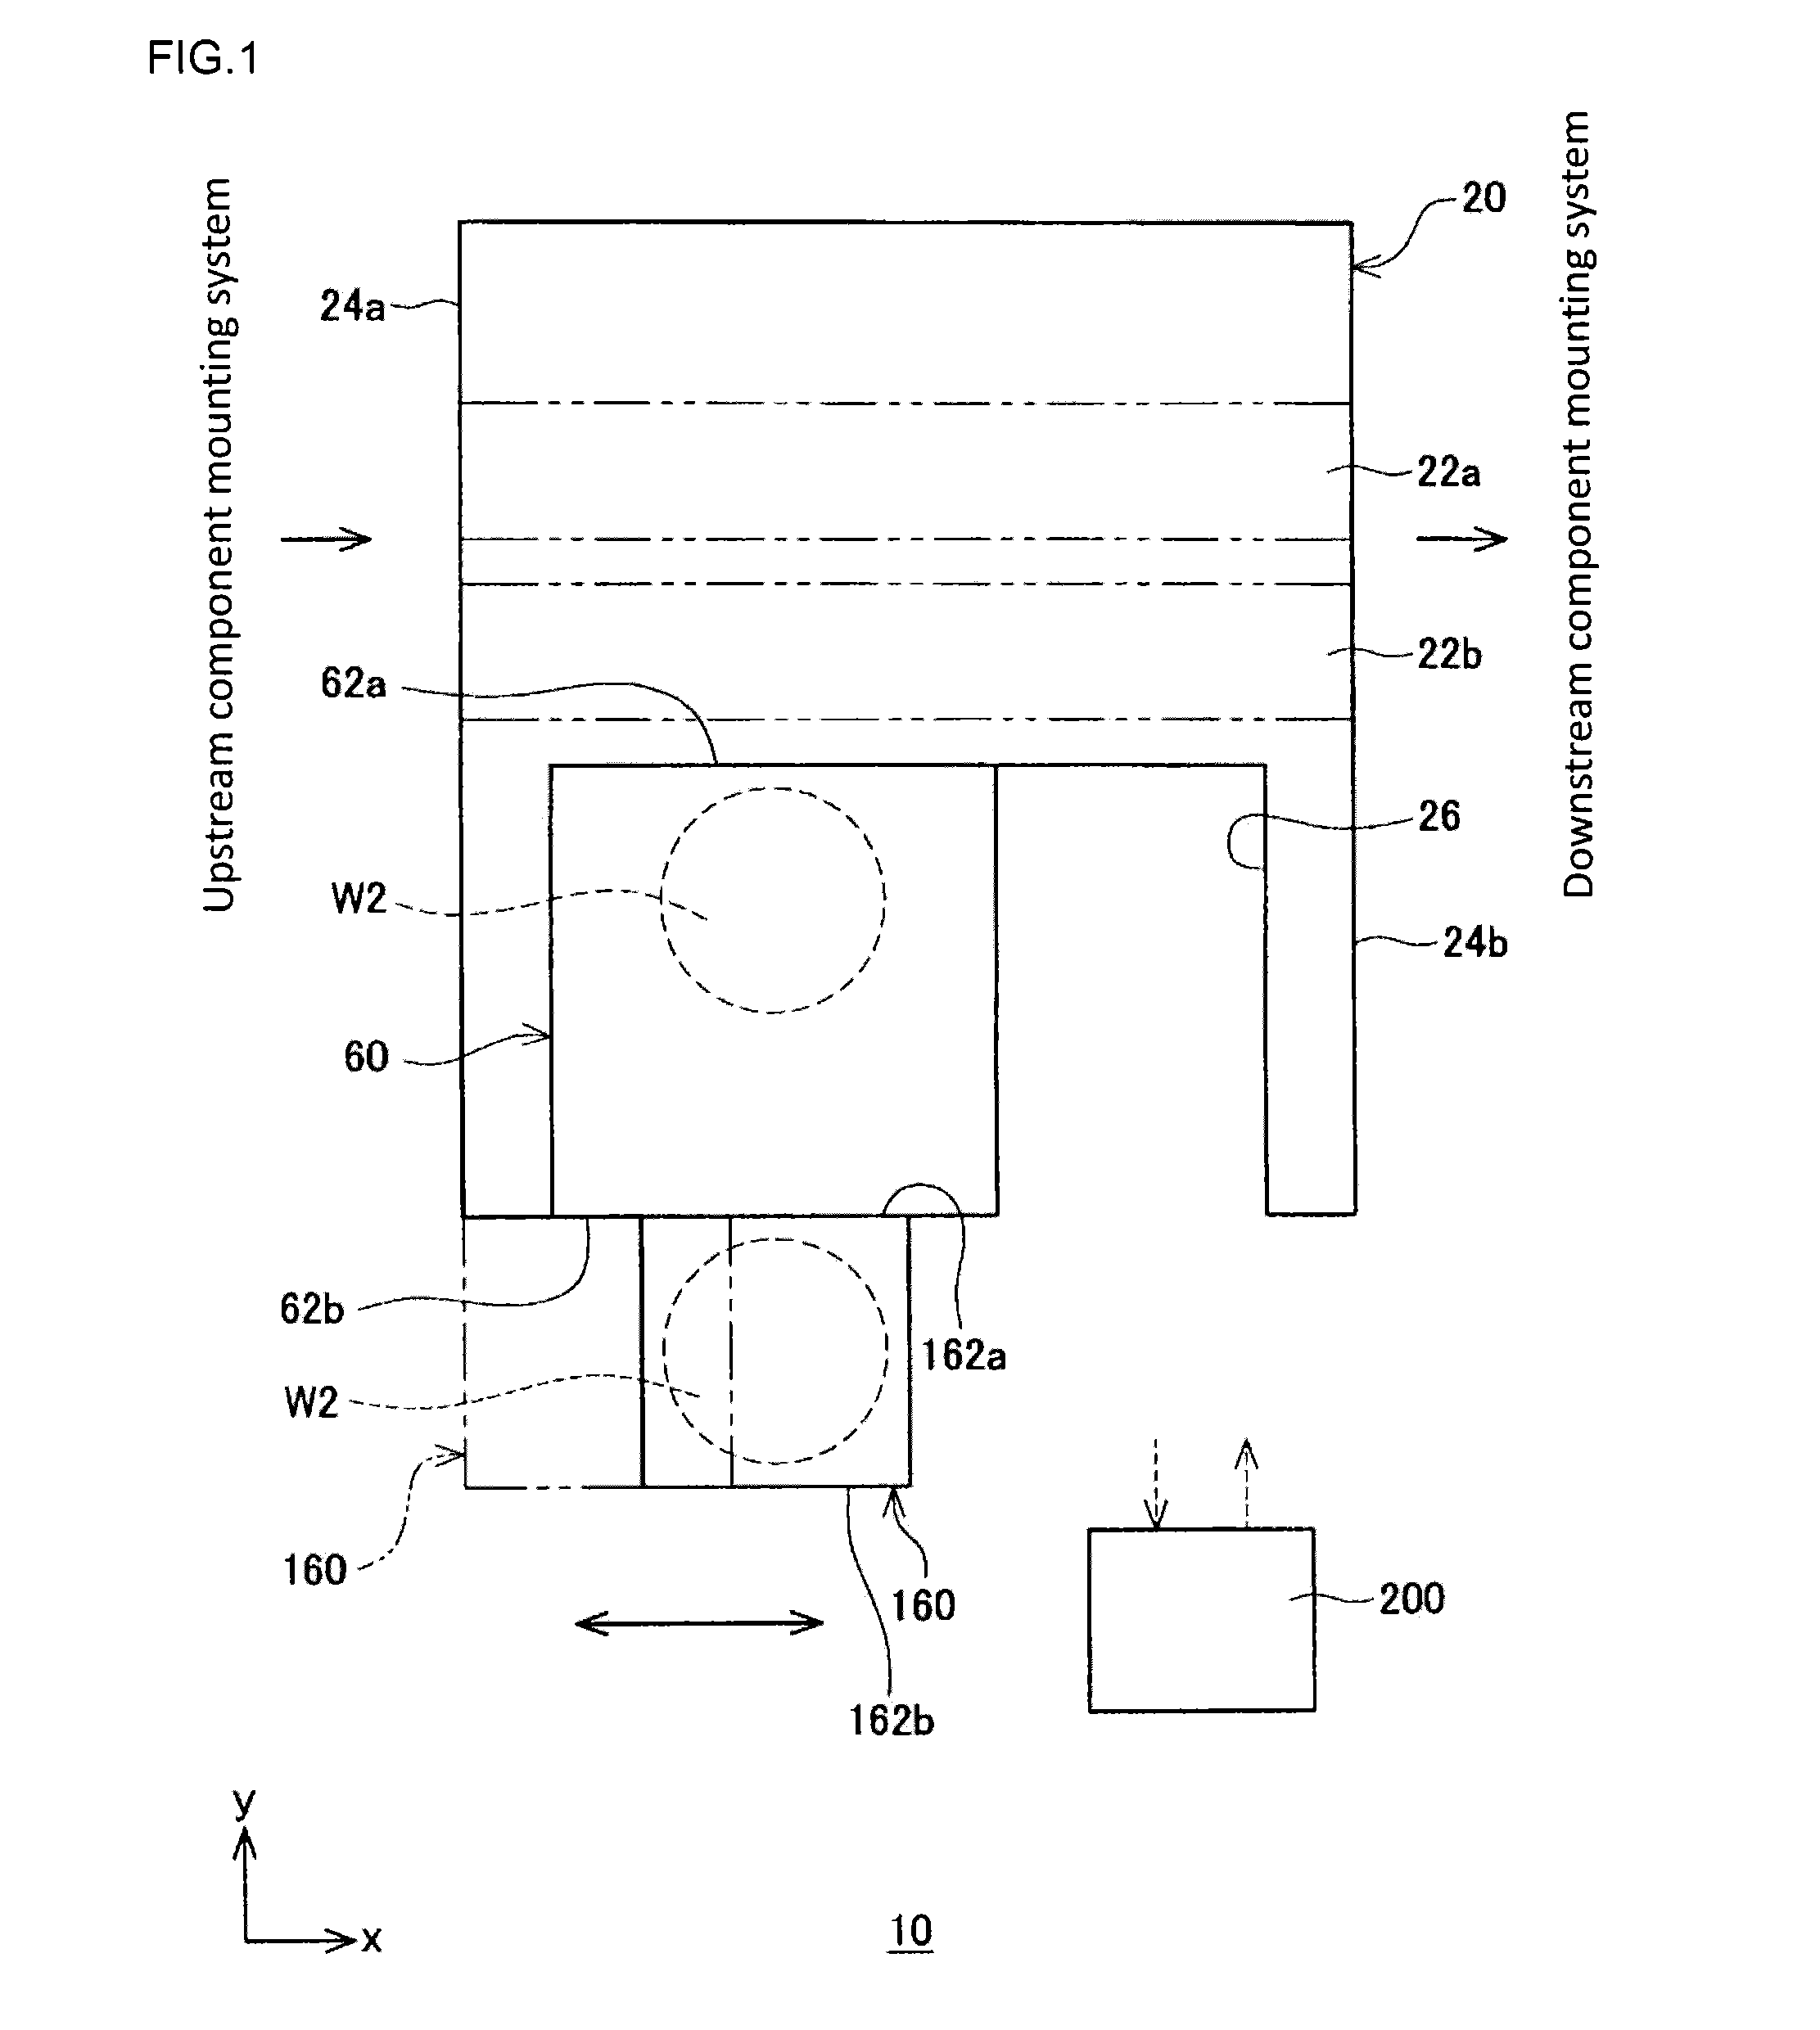 Component supply device